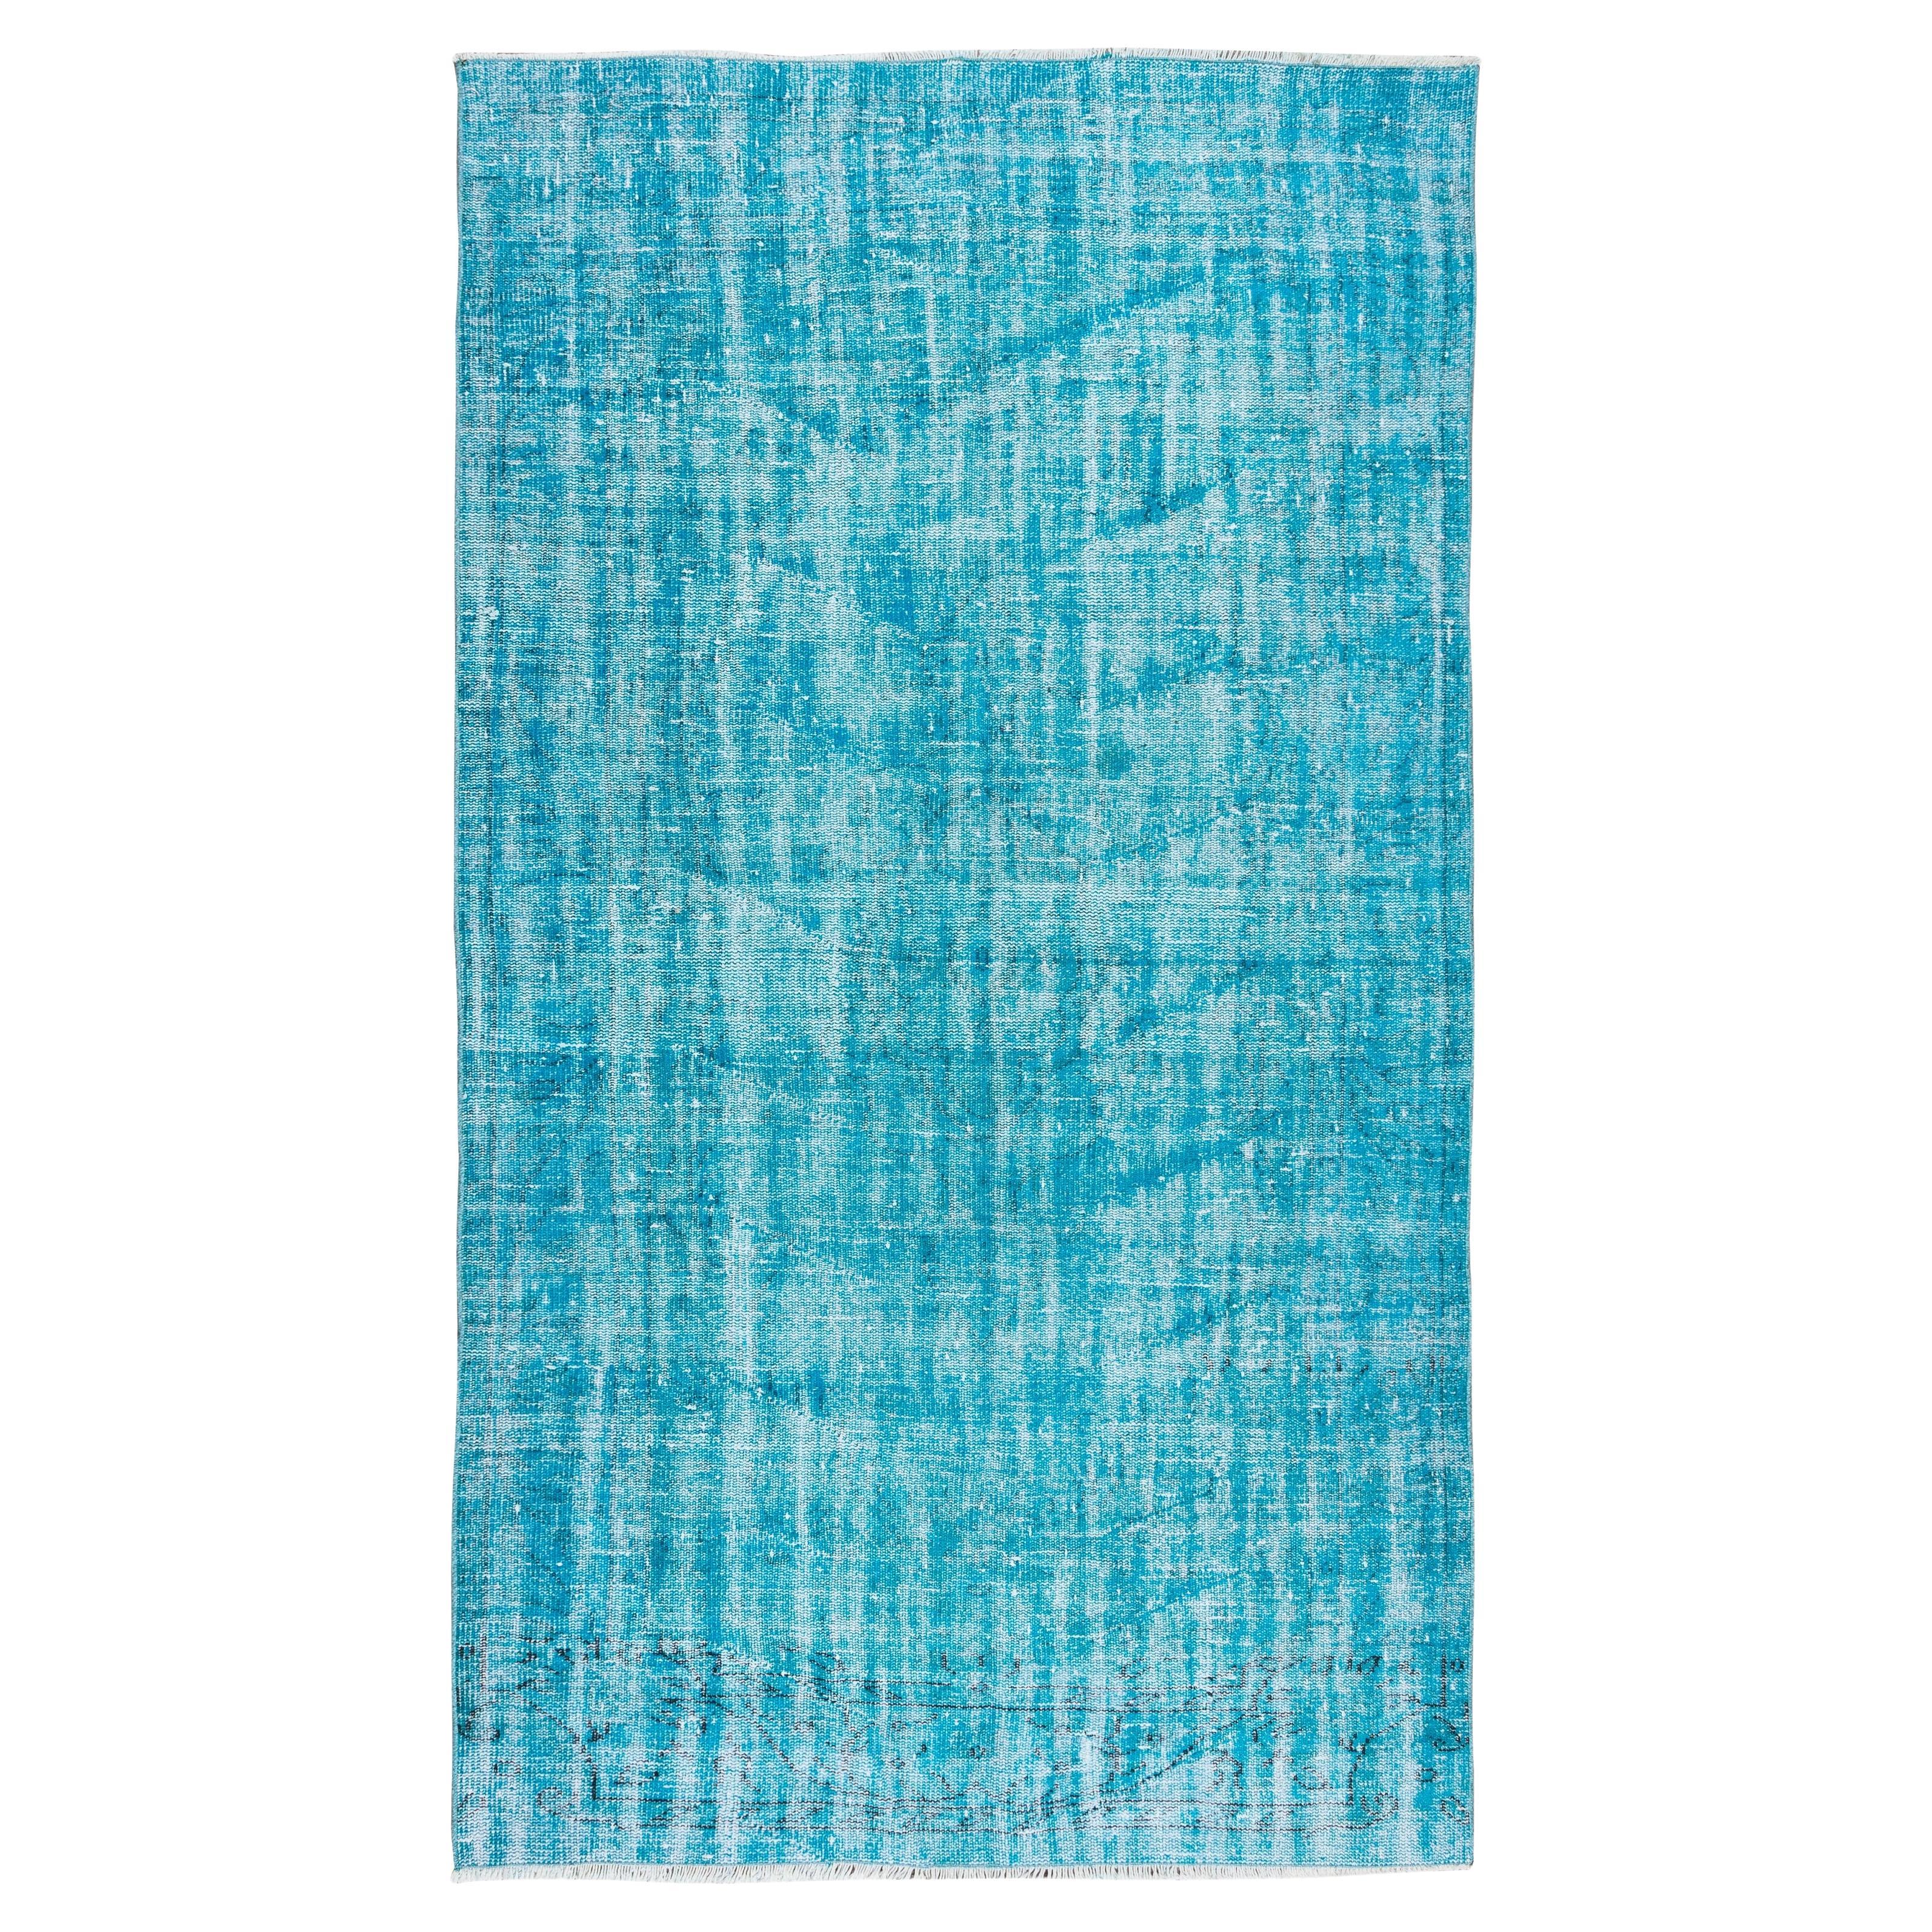 4.9x8.6 Ft Vintage Handmade Rug Over-Dyed in Teal for Modern Office & Home For Sale